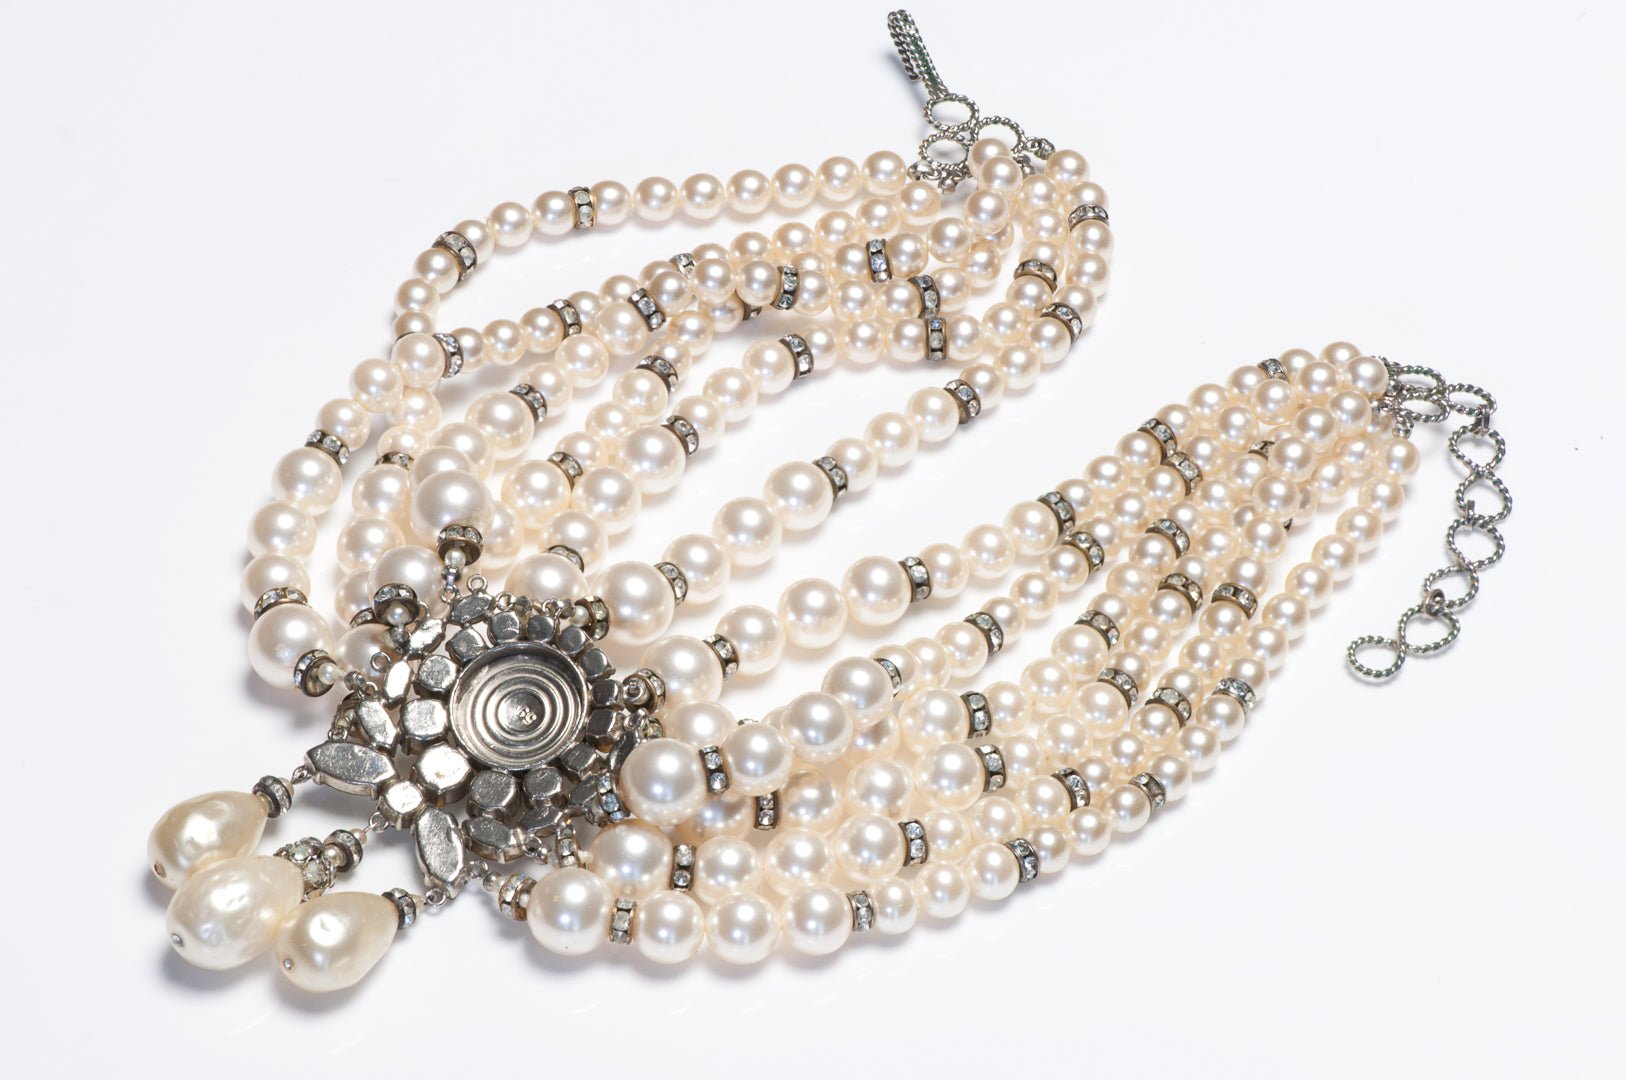 Christian Dior Couture 1950's Roger Jean-Pierre Pearl Crystal Choker Necklace